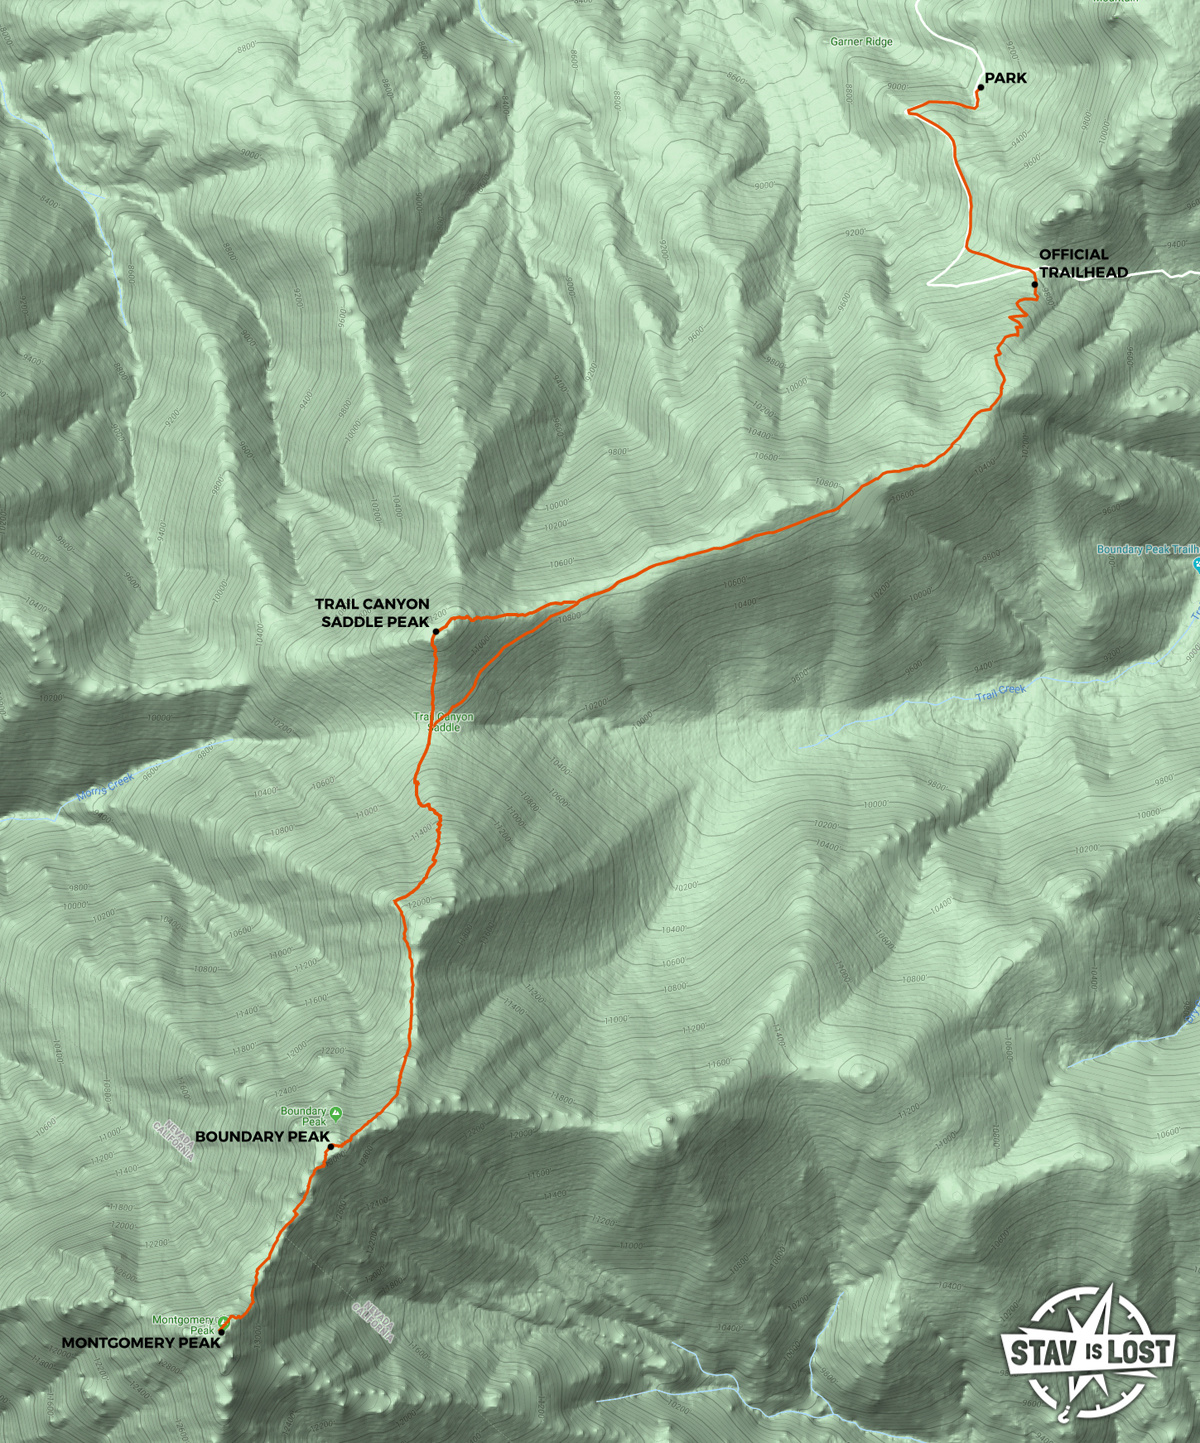 map for Boundary Peak and Montgomery Peak by stav is lost